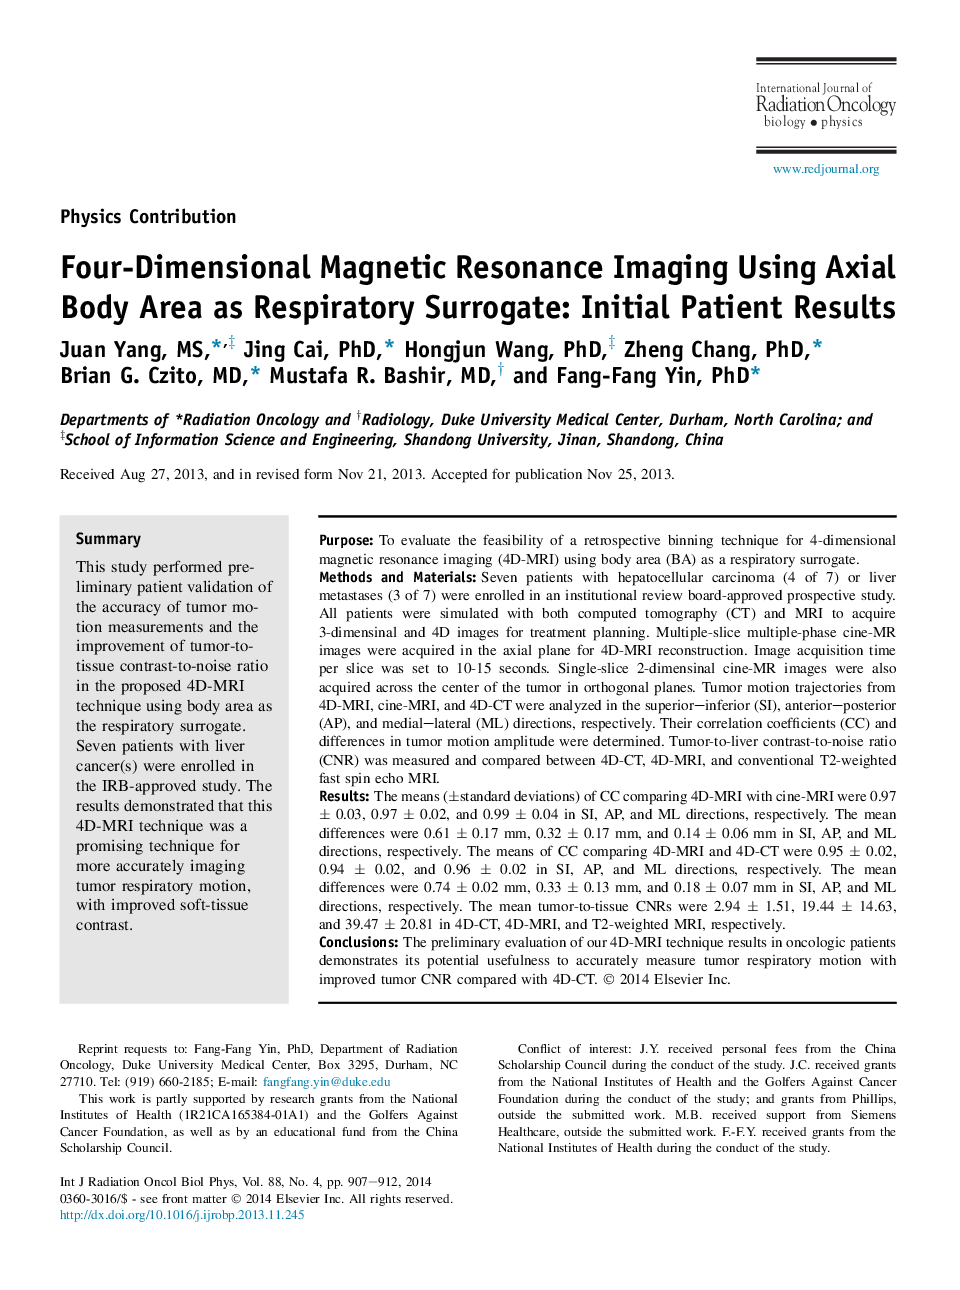 Four-Dimensional Magnetic Resonance Imaging Using Axial Body Area as Respiratory Surrogate: Initial Patient Results